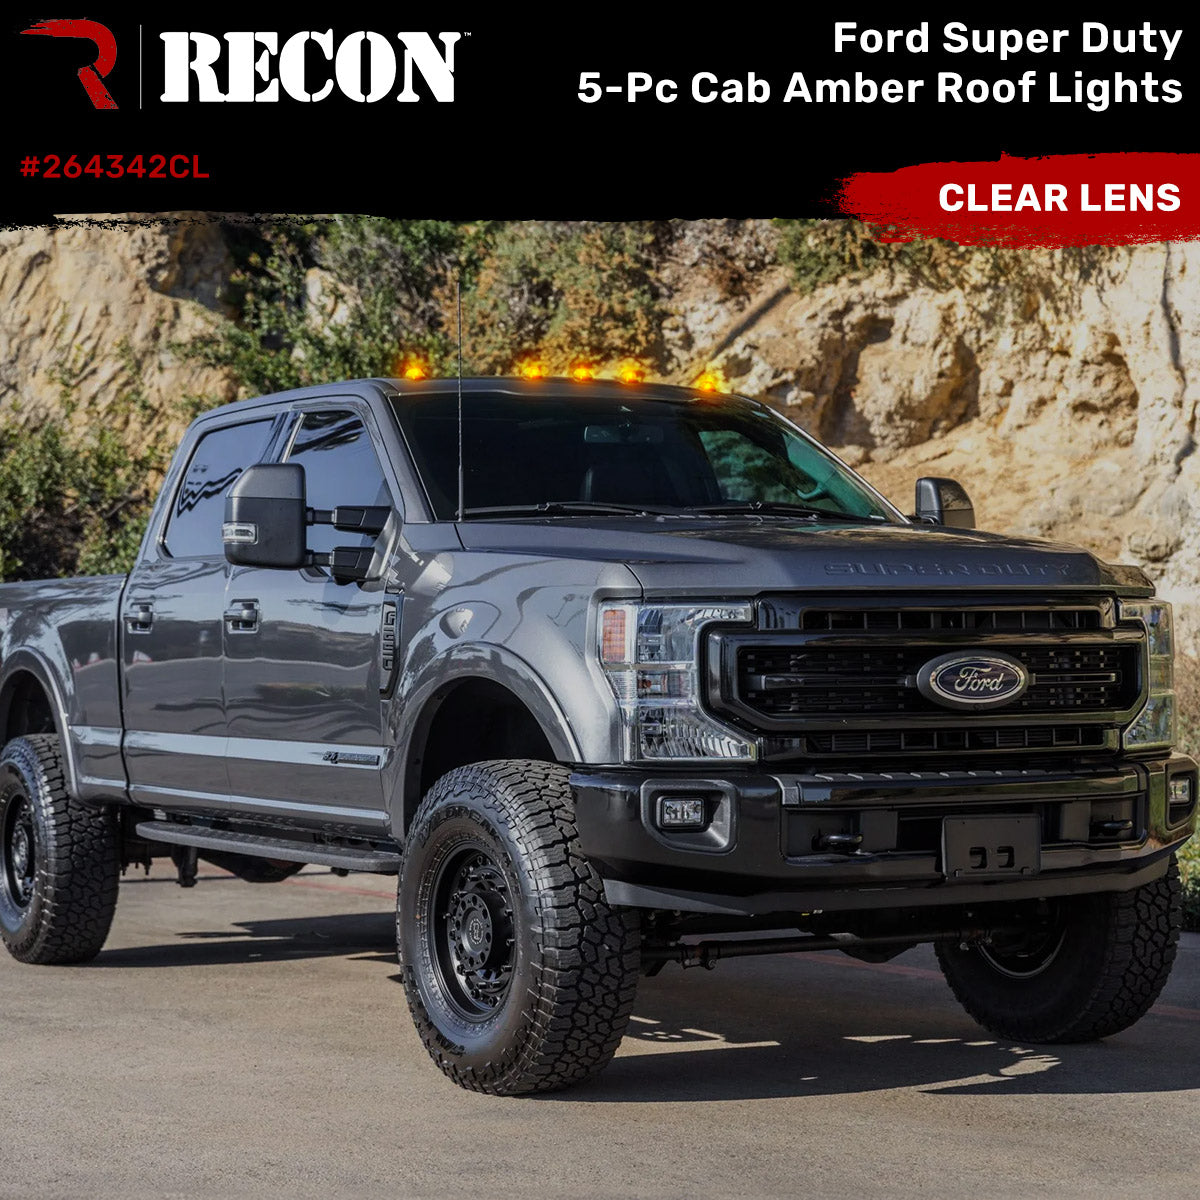 Ford Truck LED Lights & Accessories | Gorecon.com